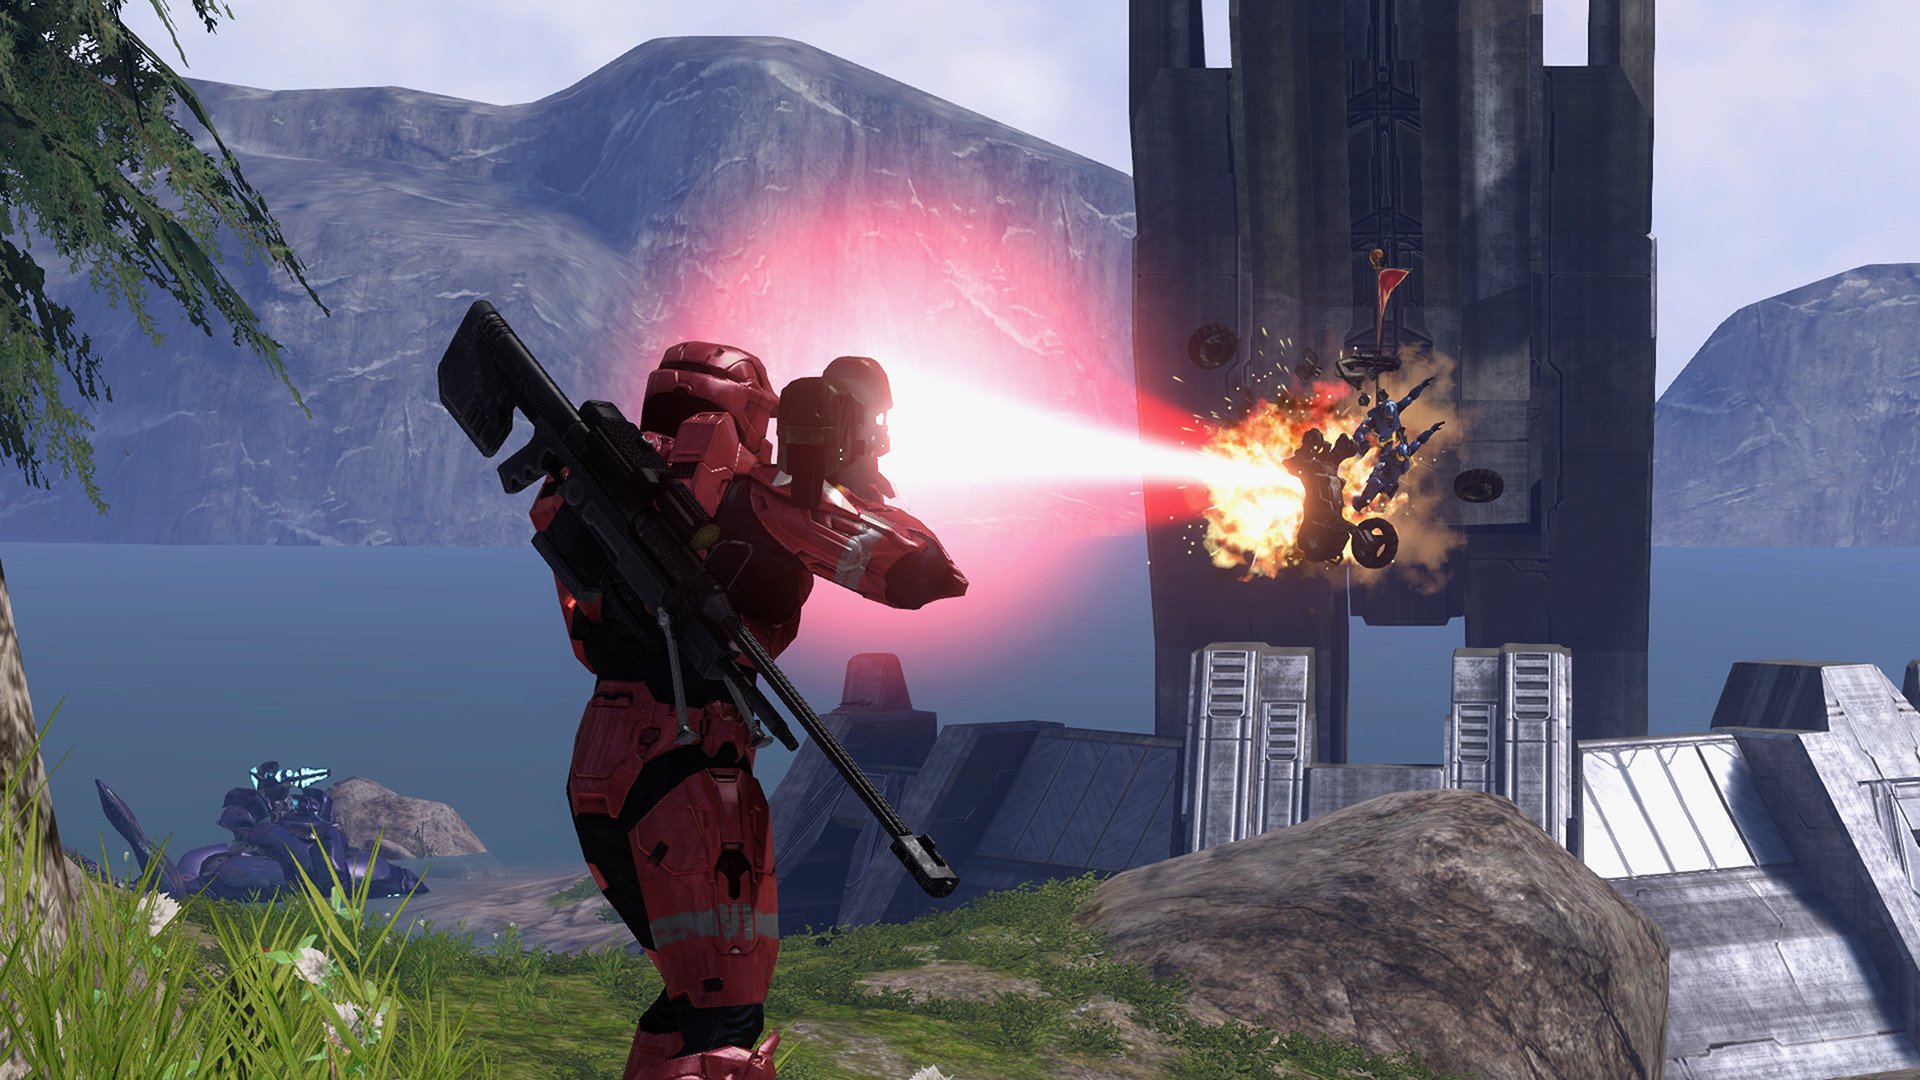 Halo 3 players help fan get their final achievement before server closure |  Windows Central